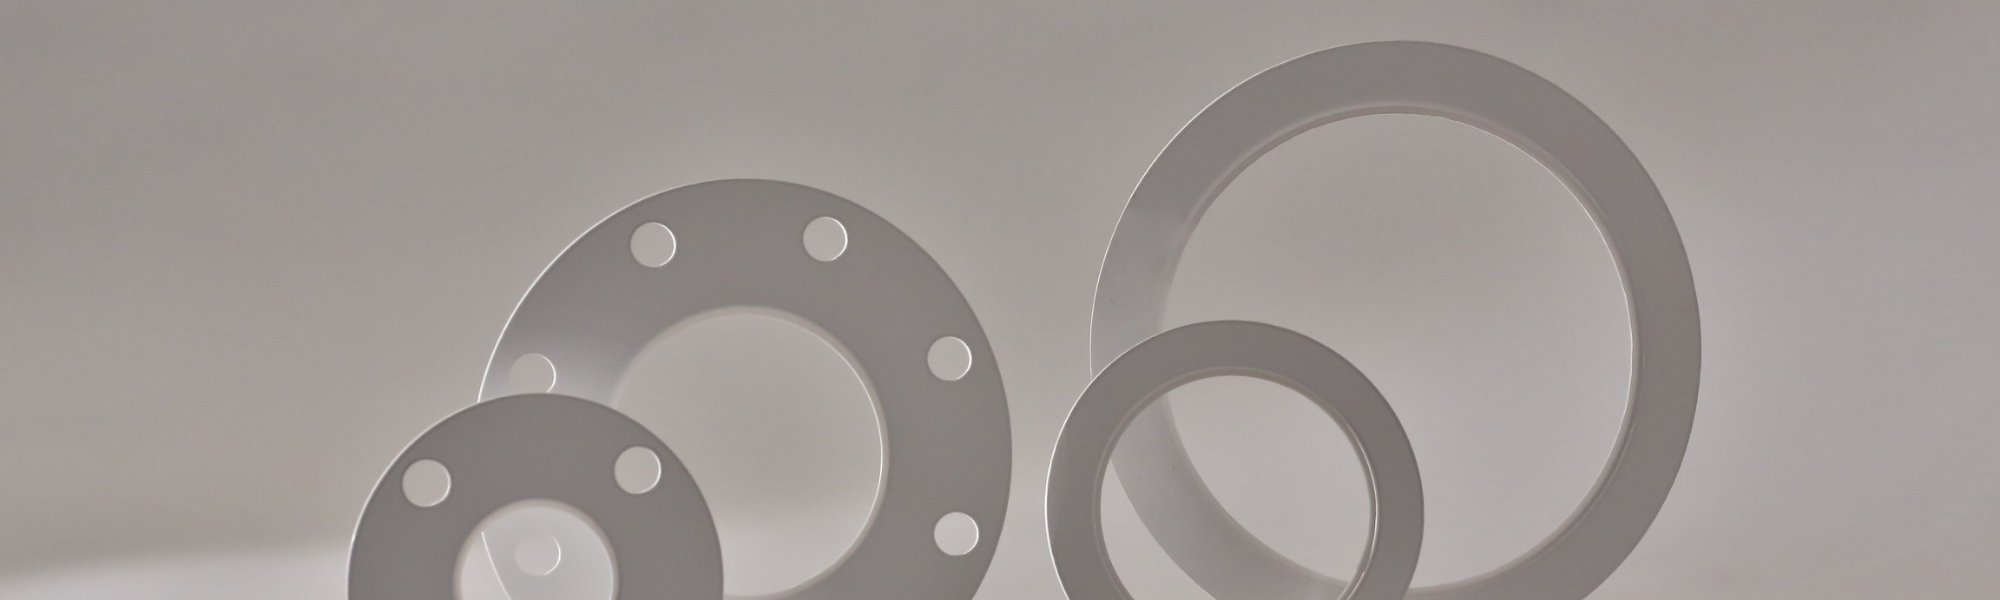 GORE Universal Pipe Gasket Style 800 are used to seal steel, glass-lined steel, and FRP piping in chemical processing